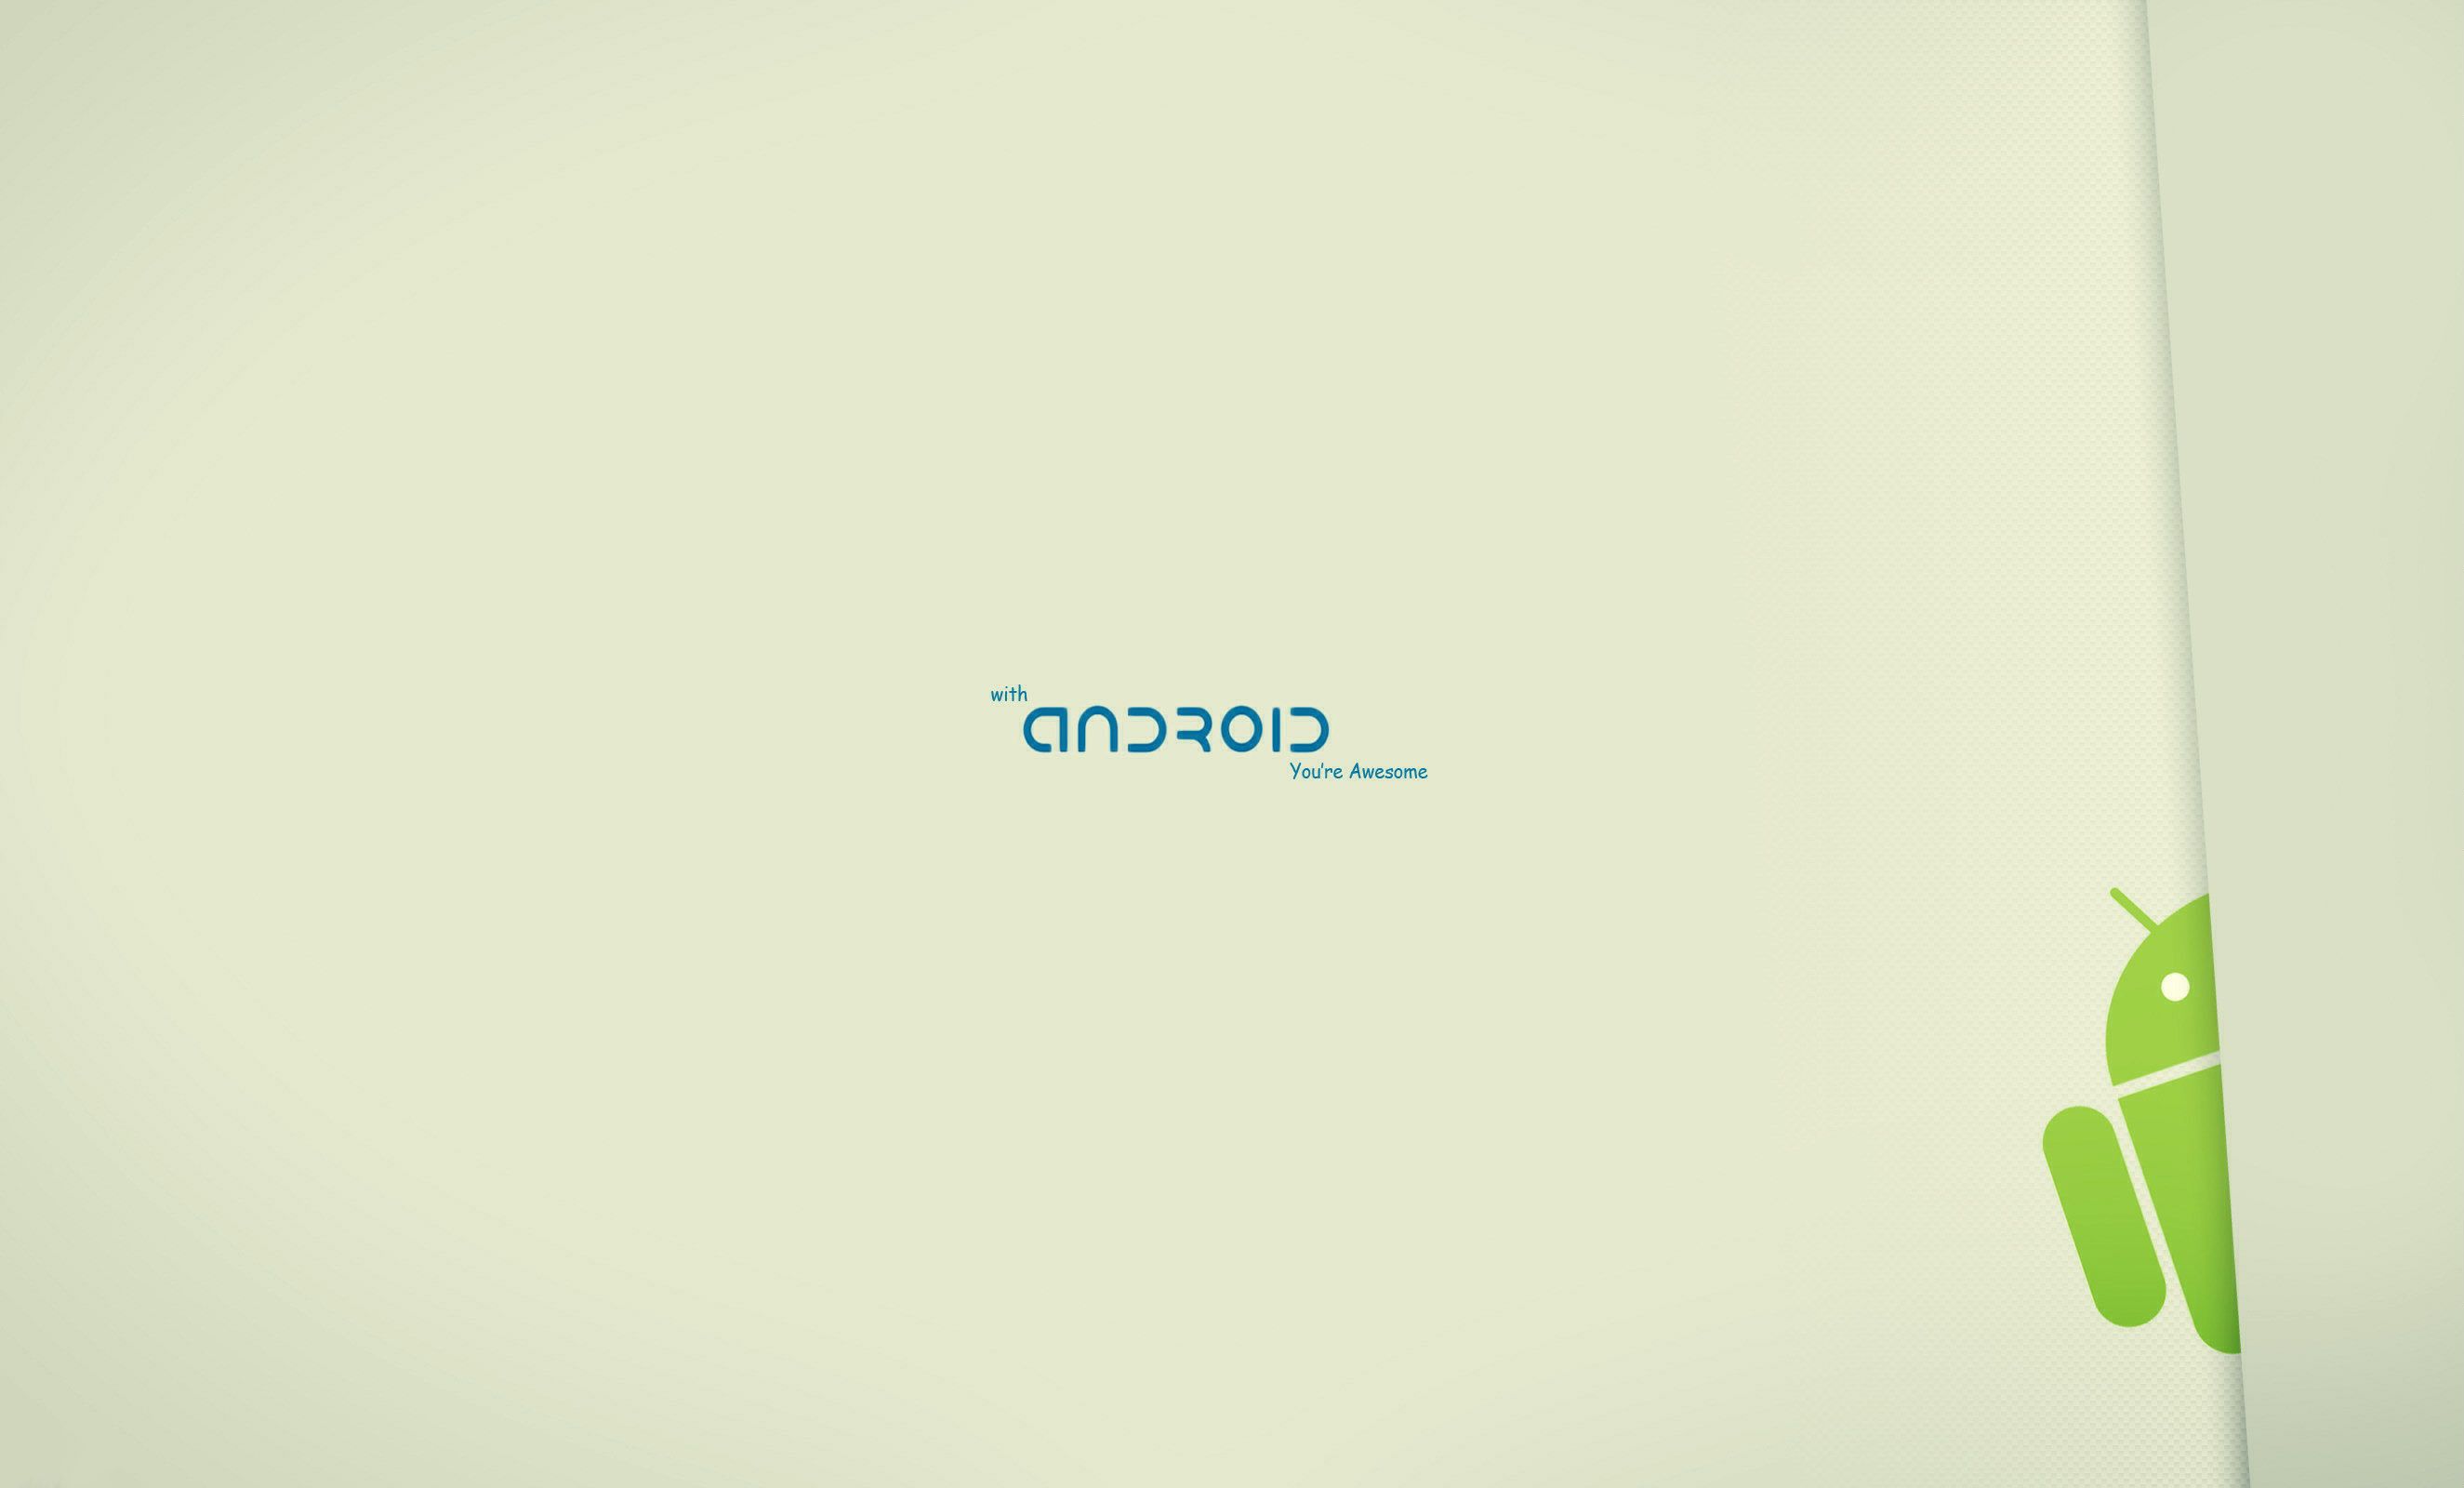 With Android You Wallpaper Awesome Wallpaper High resolution